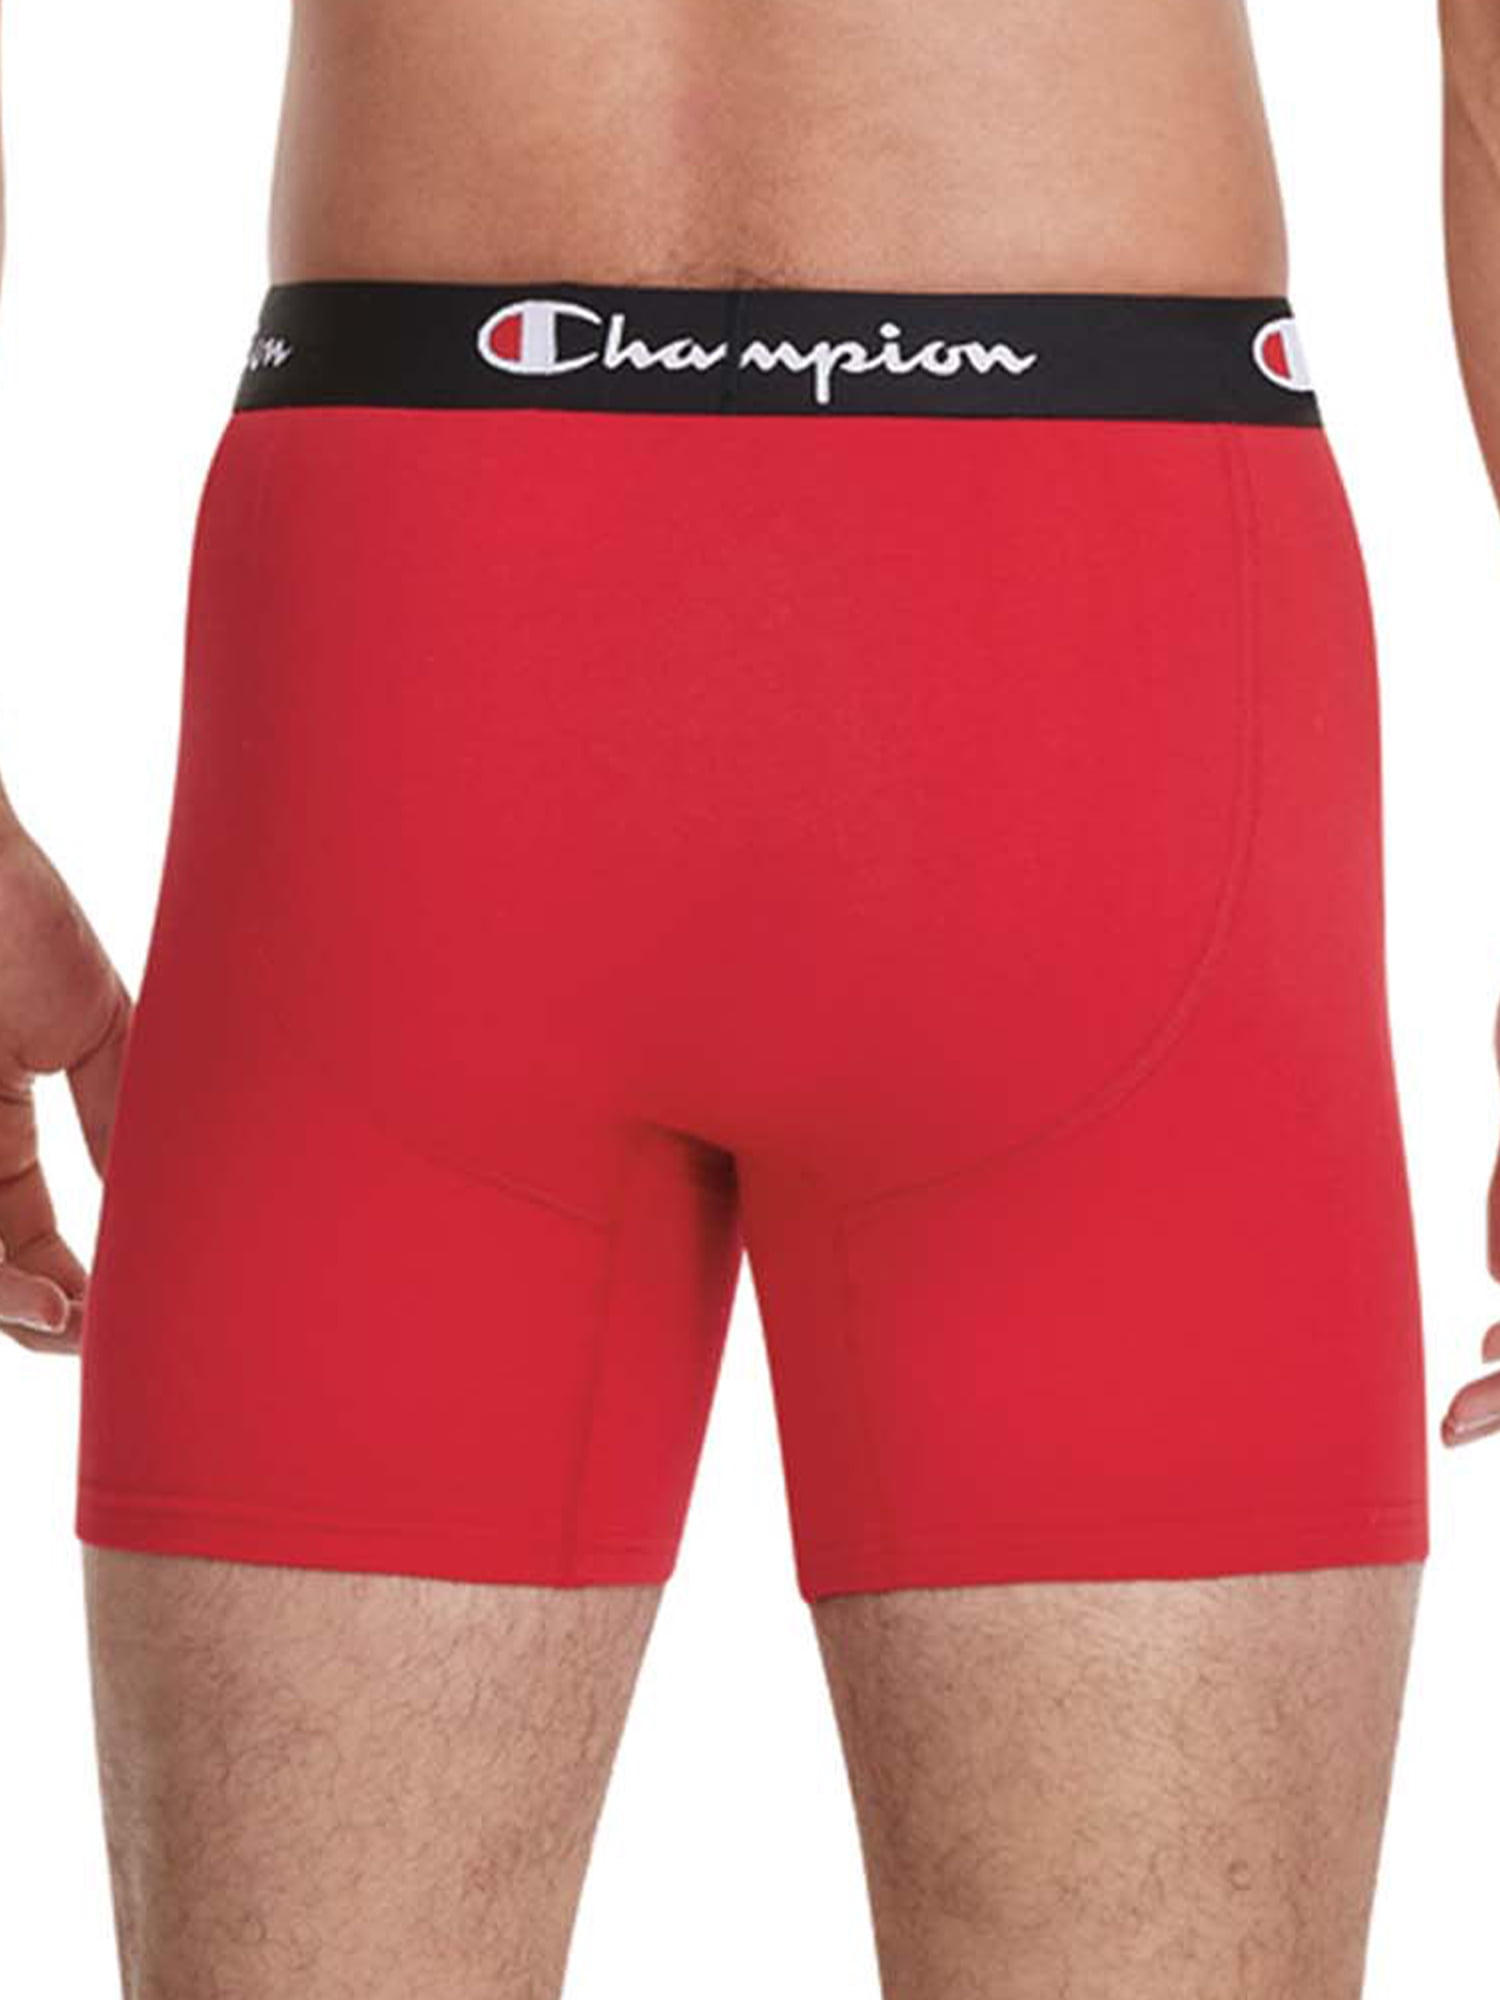 Champion Light Weight Stretch Mesh Boxer Brief - Assorted / Large, 3 pc -  Smith's Food and Drug